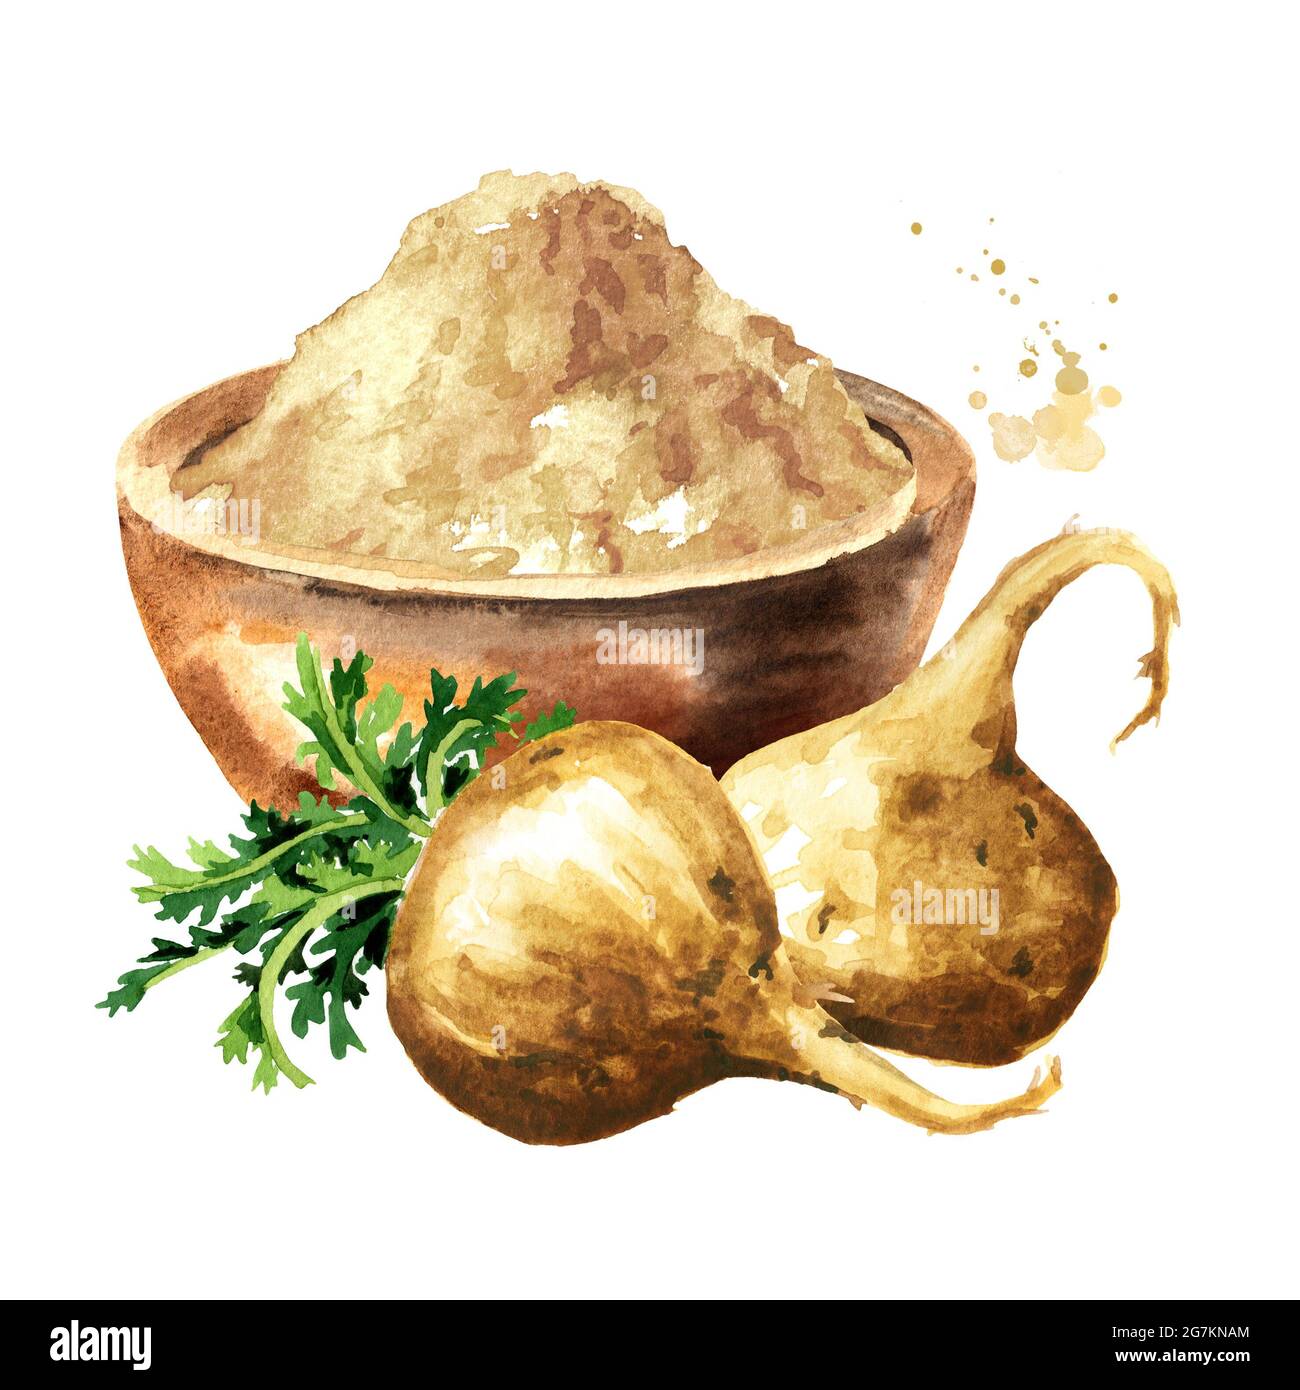 Ginseng maca or which is better The Surprising